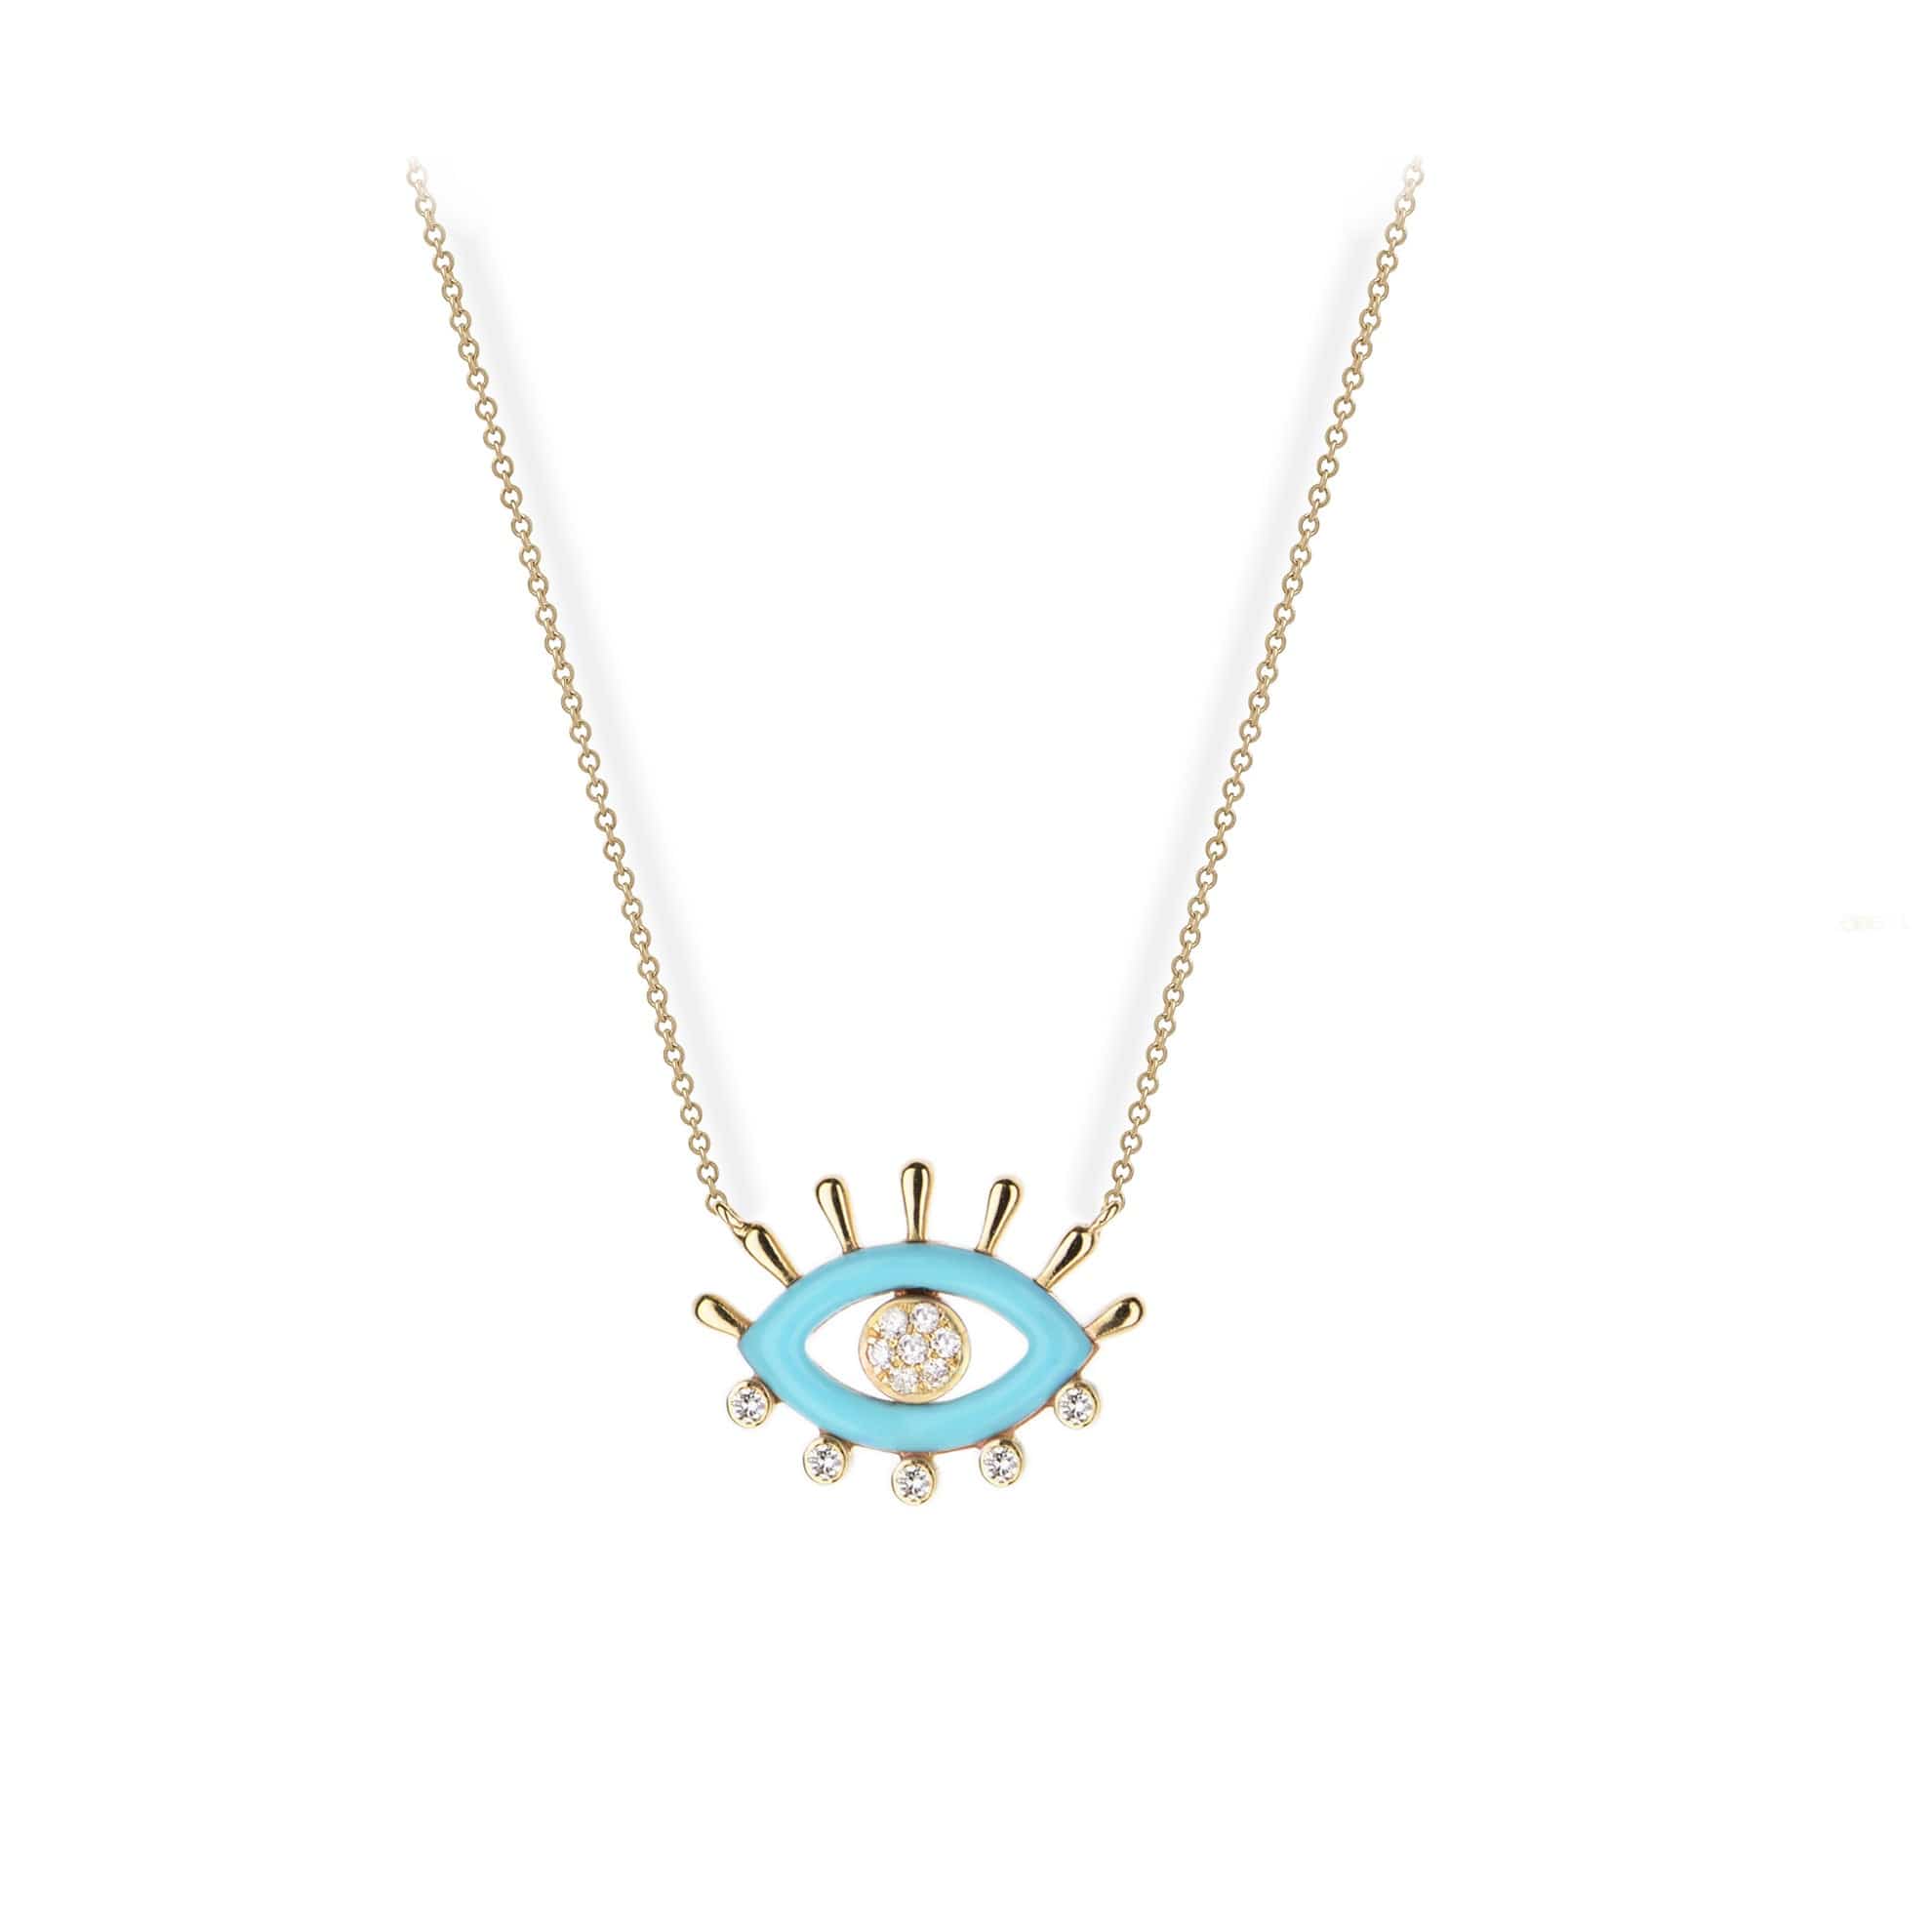 M. Fitaihi Candy Powerful Eye Necklace - M.Fitaihi